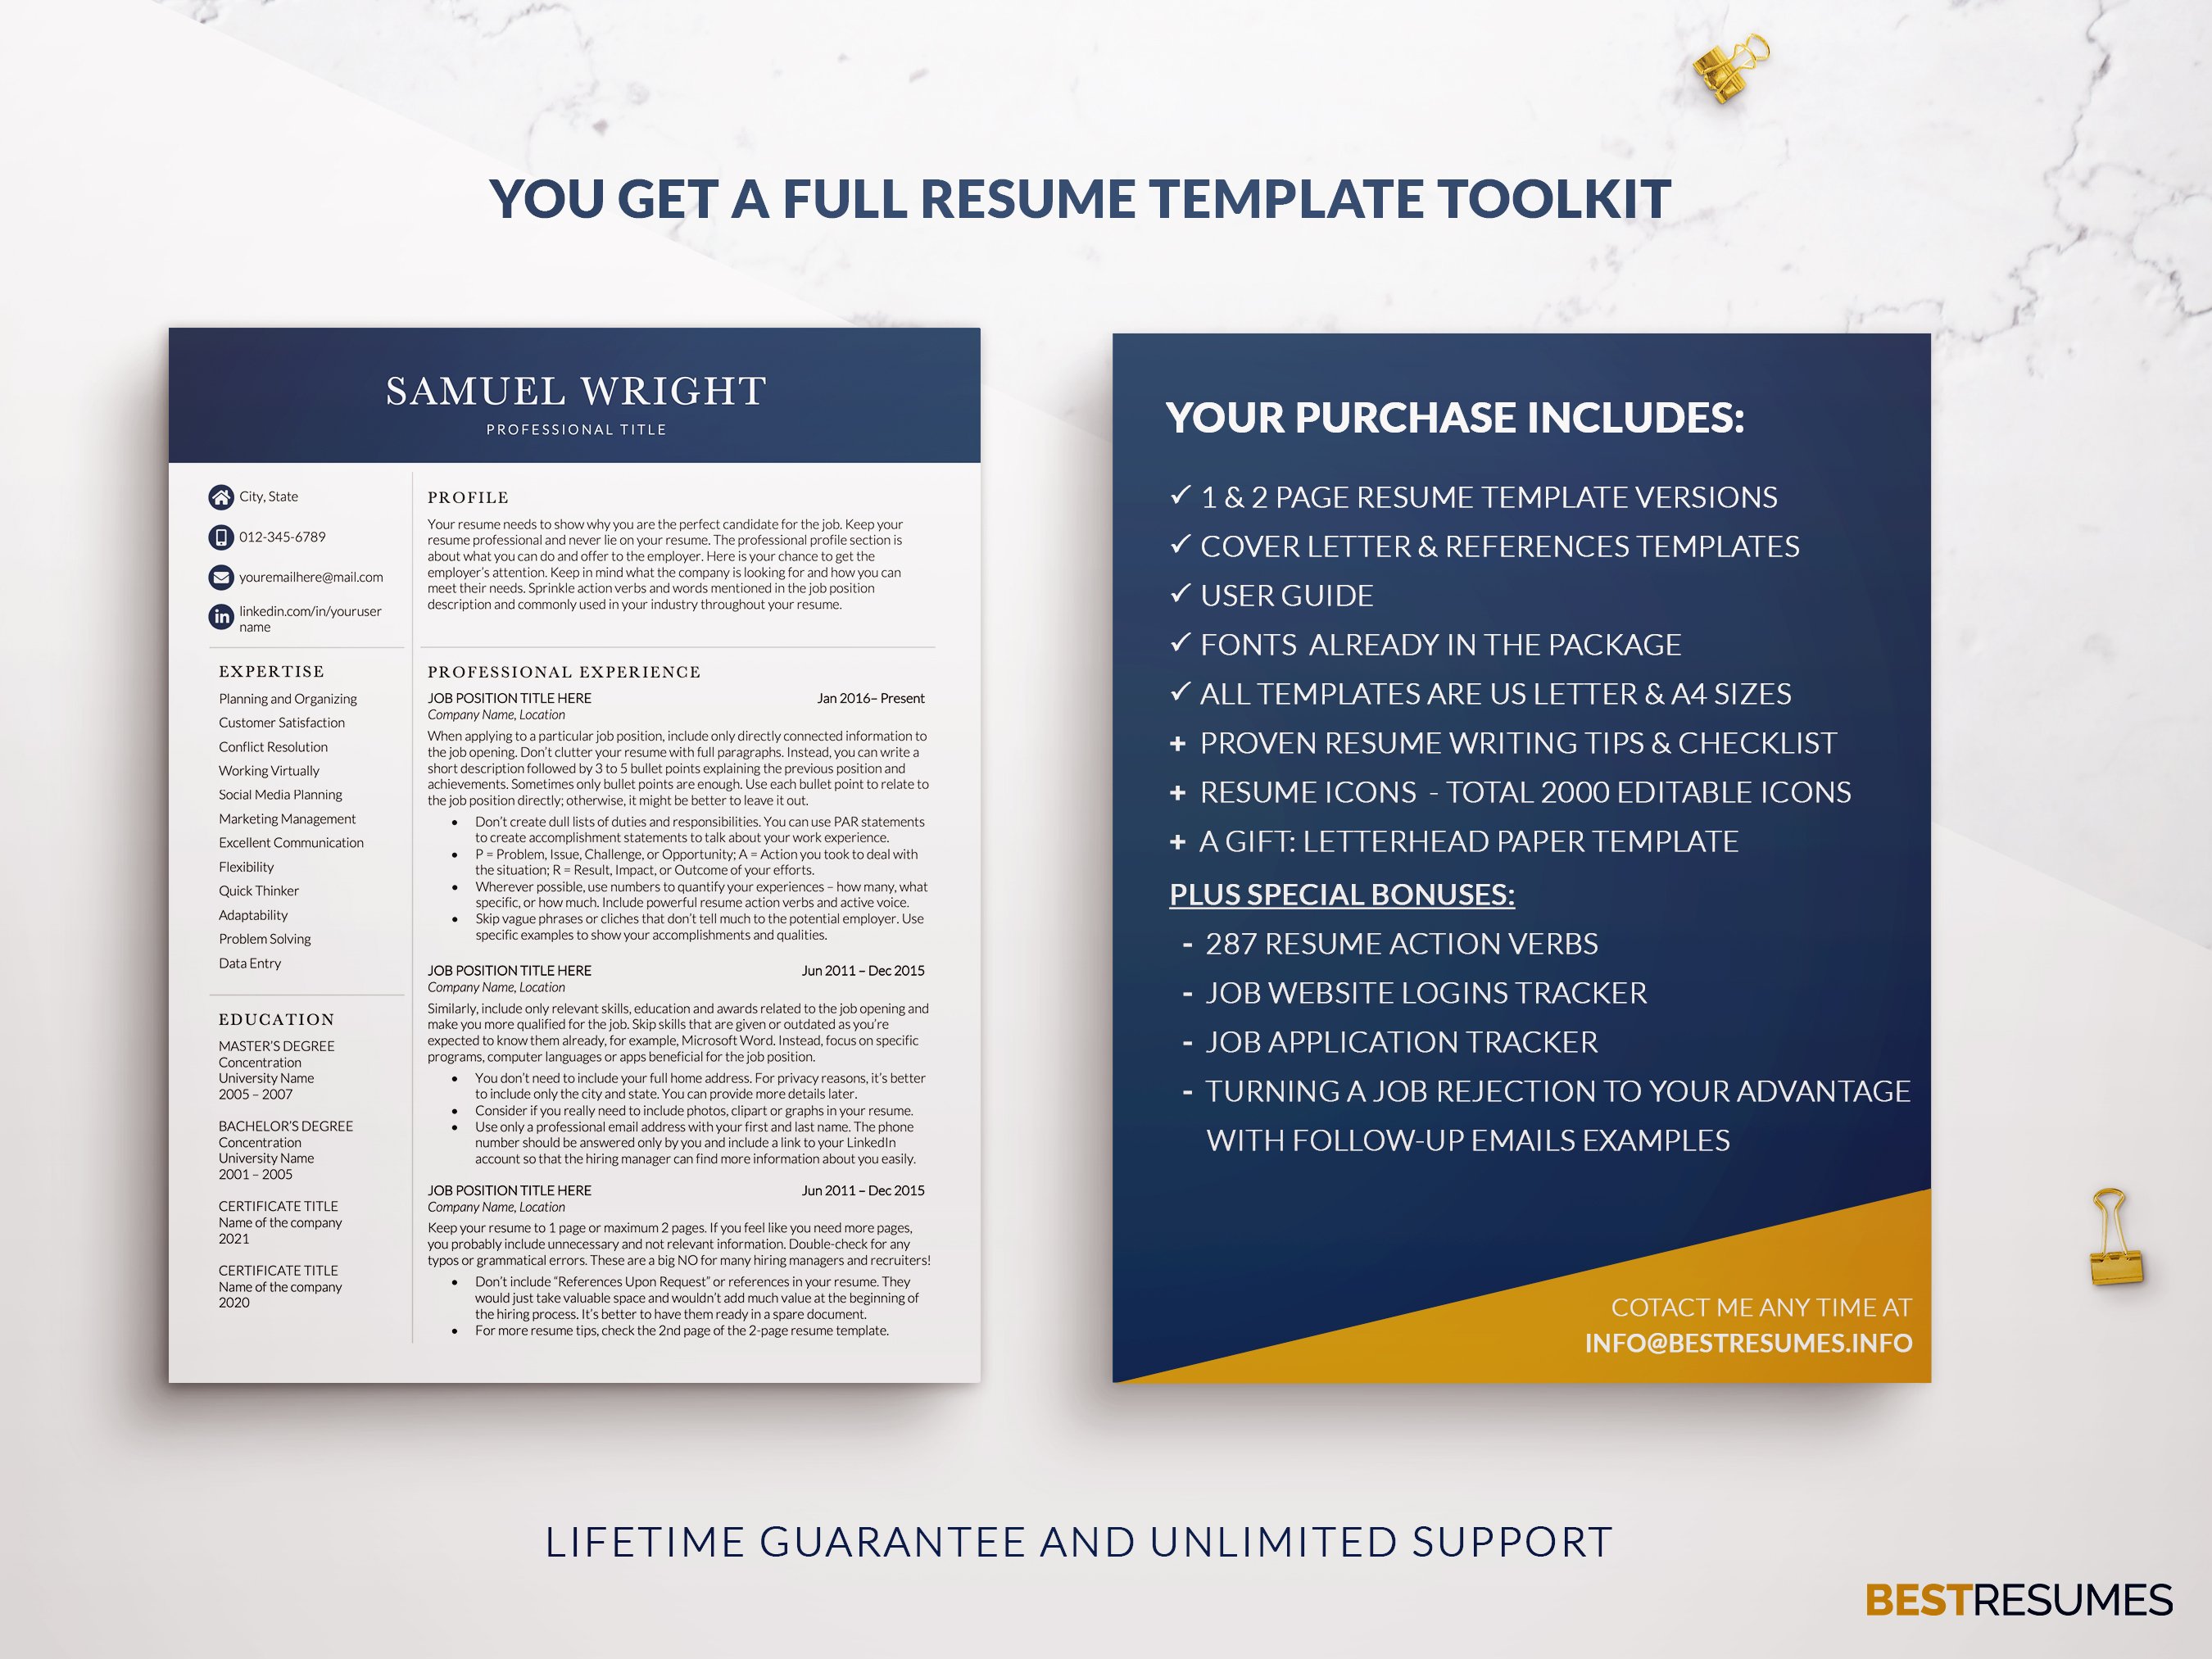 executive resume template resume support samuel wright 243